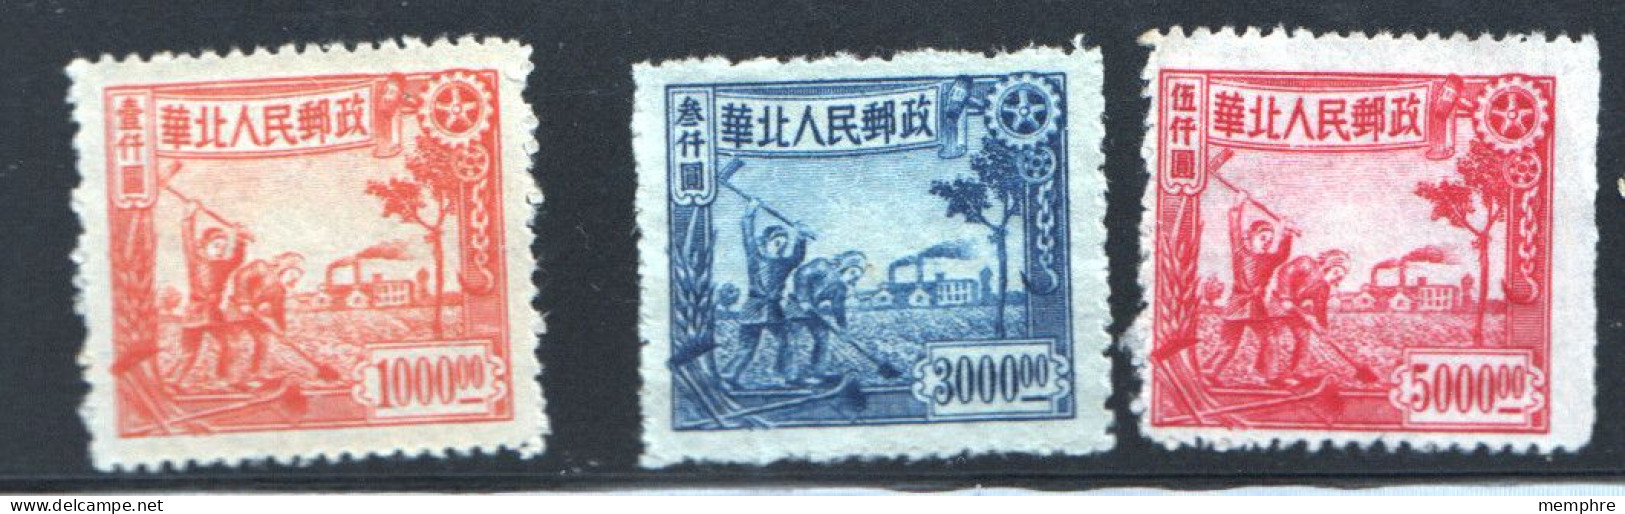 1949 North China Peasants And Actory Complete Set Of 3 Sc 3L96-8 No Gum, As Issued - Nordchina 1949-50